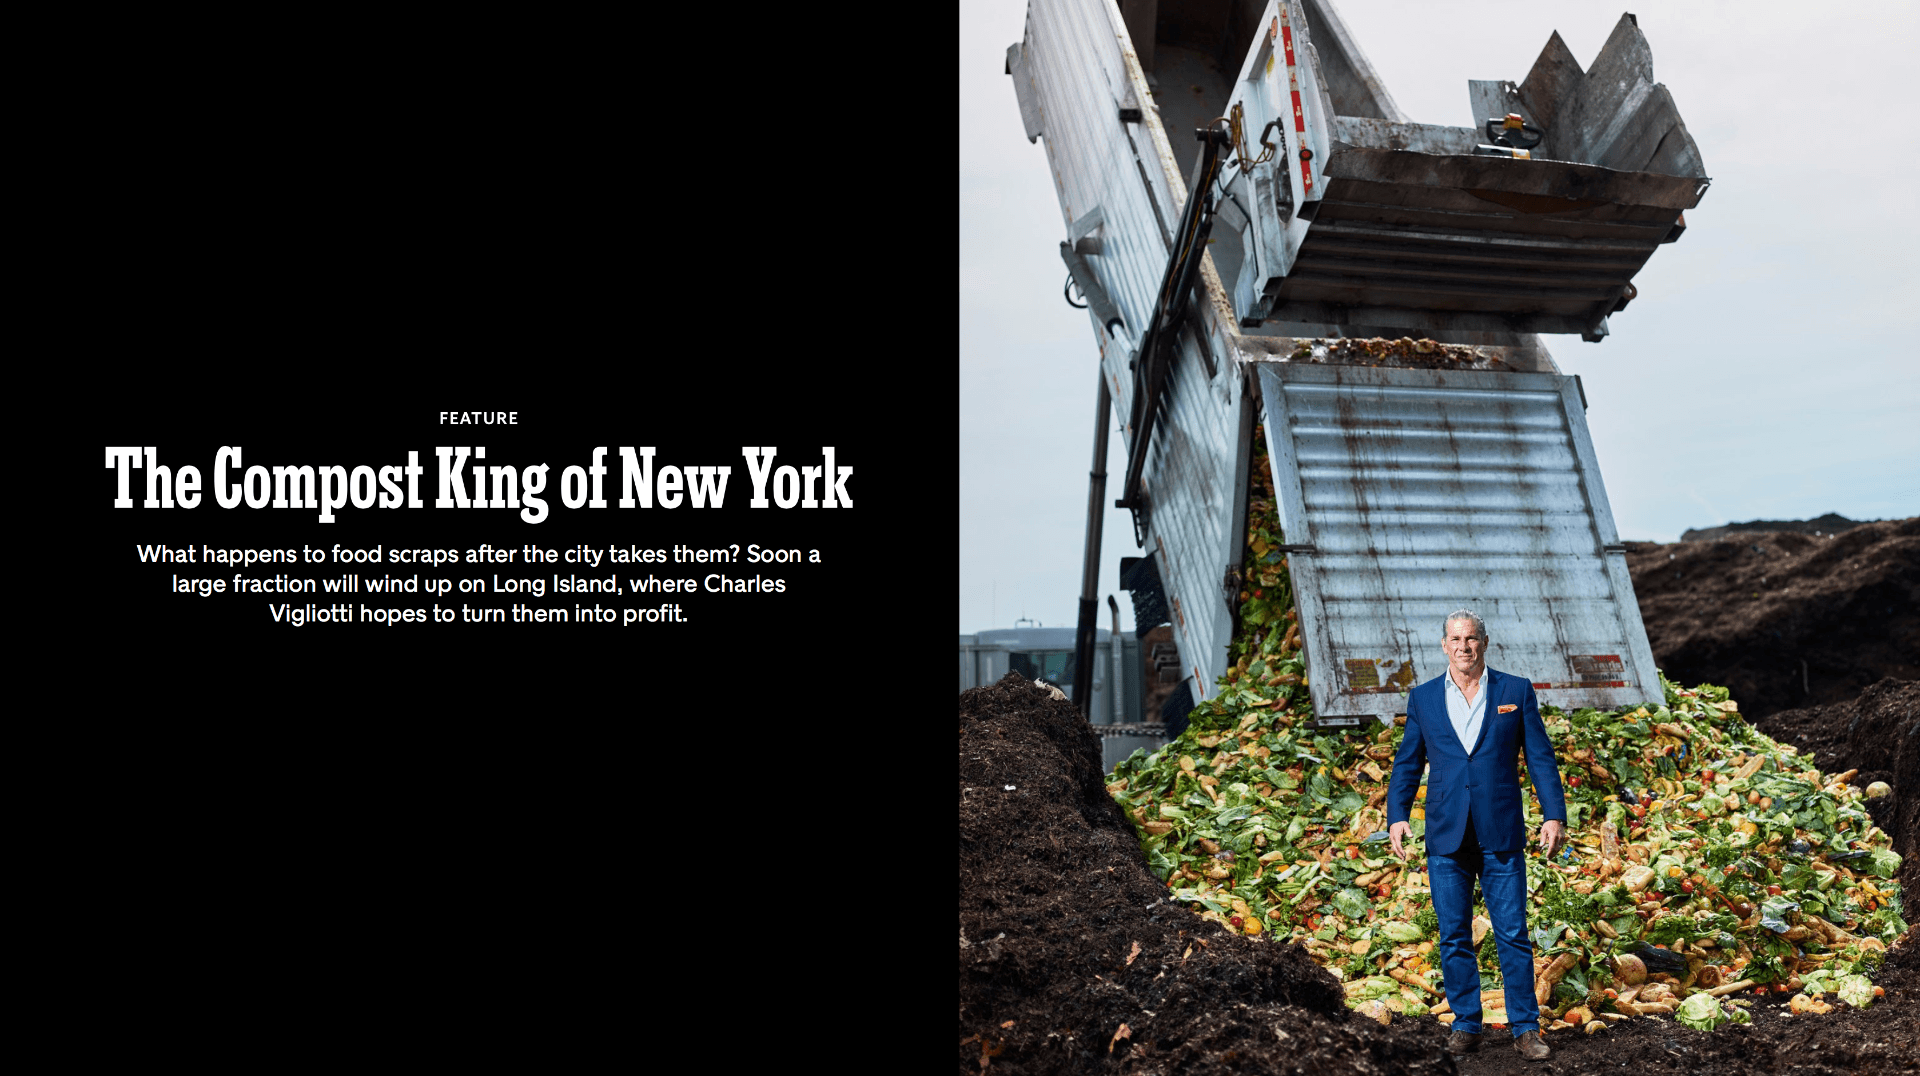 The Compost King of New York